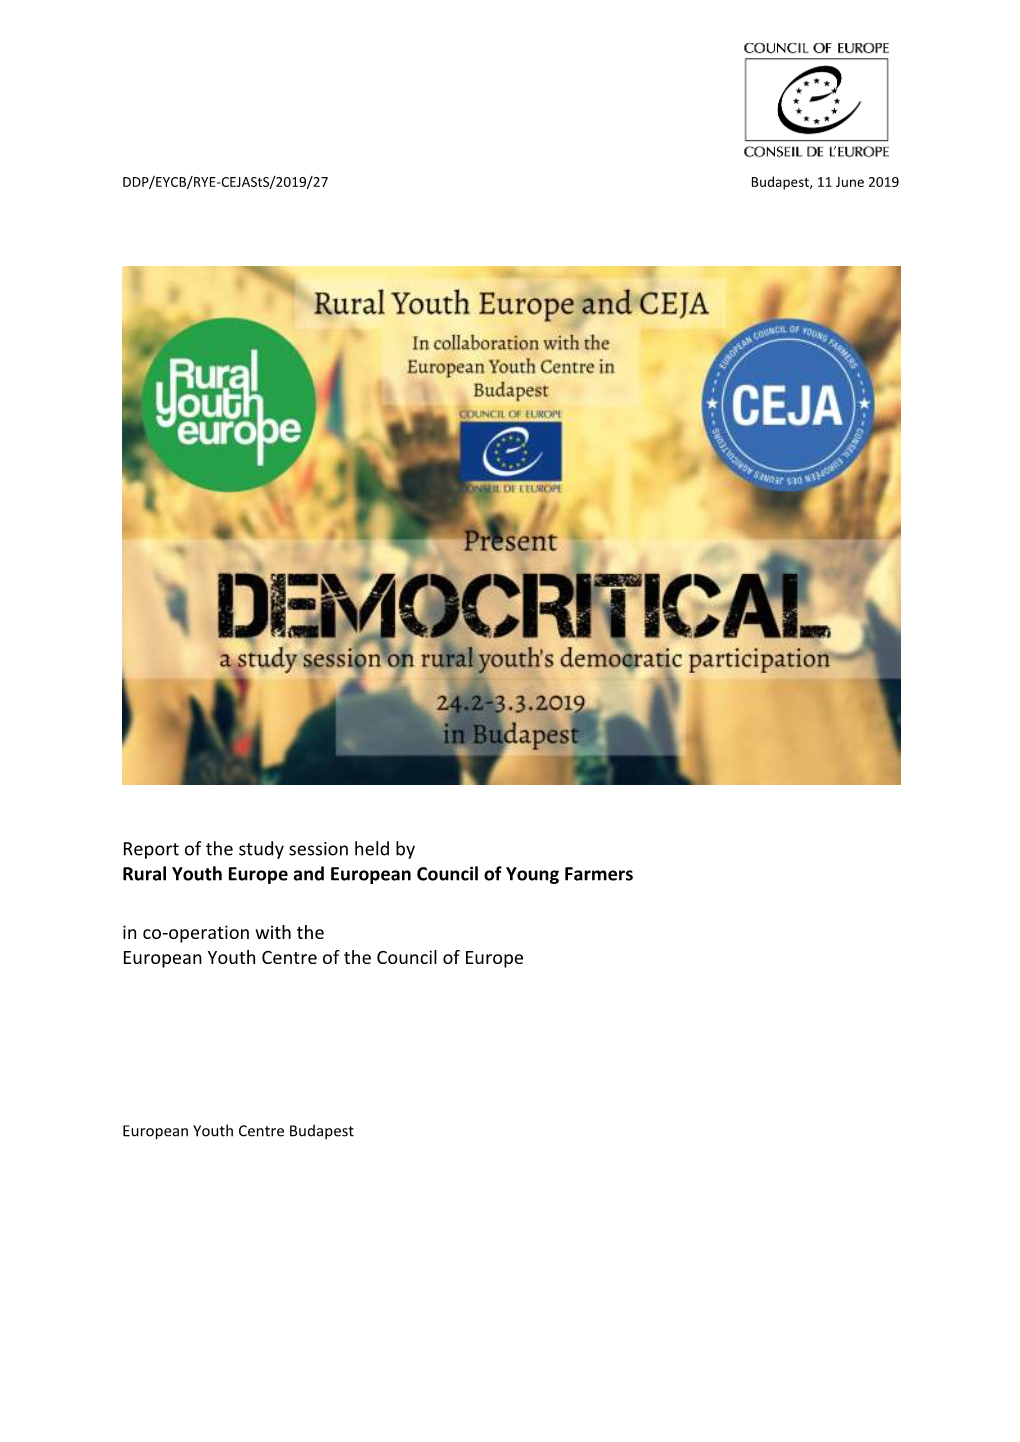 Report of the Study Session Held by Rural Youth Europe and European Council of Young Farmers in Co-Operation with the European Youth Centre of the Council of Europe